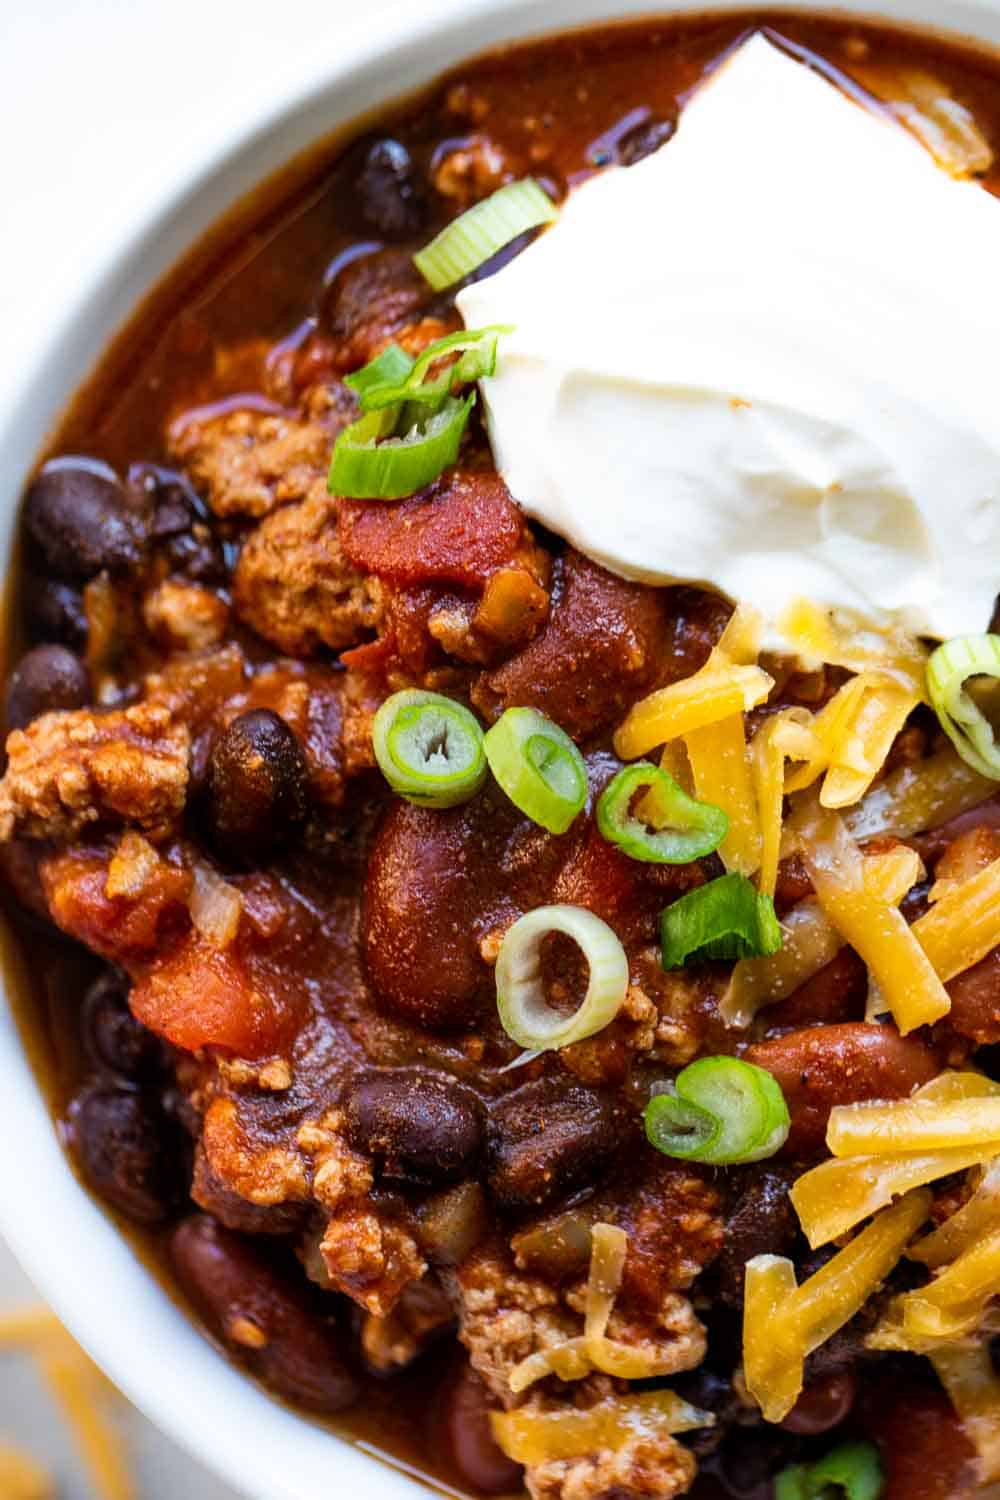 Up close look at turkey chili, showing chunks of ground turkey and beans